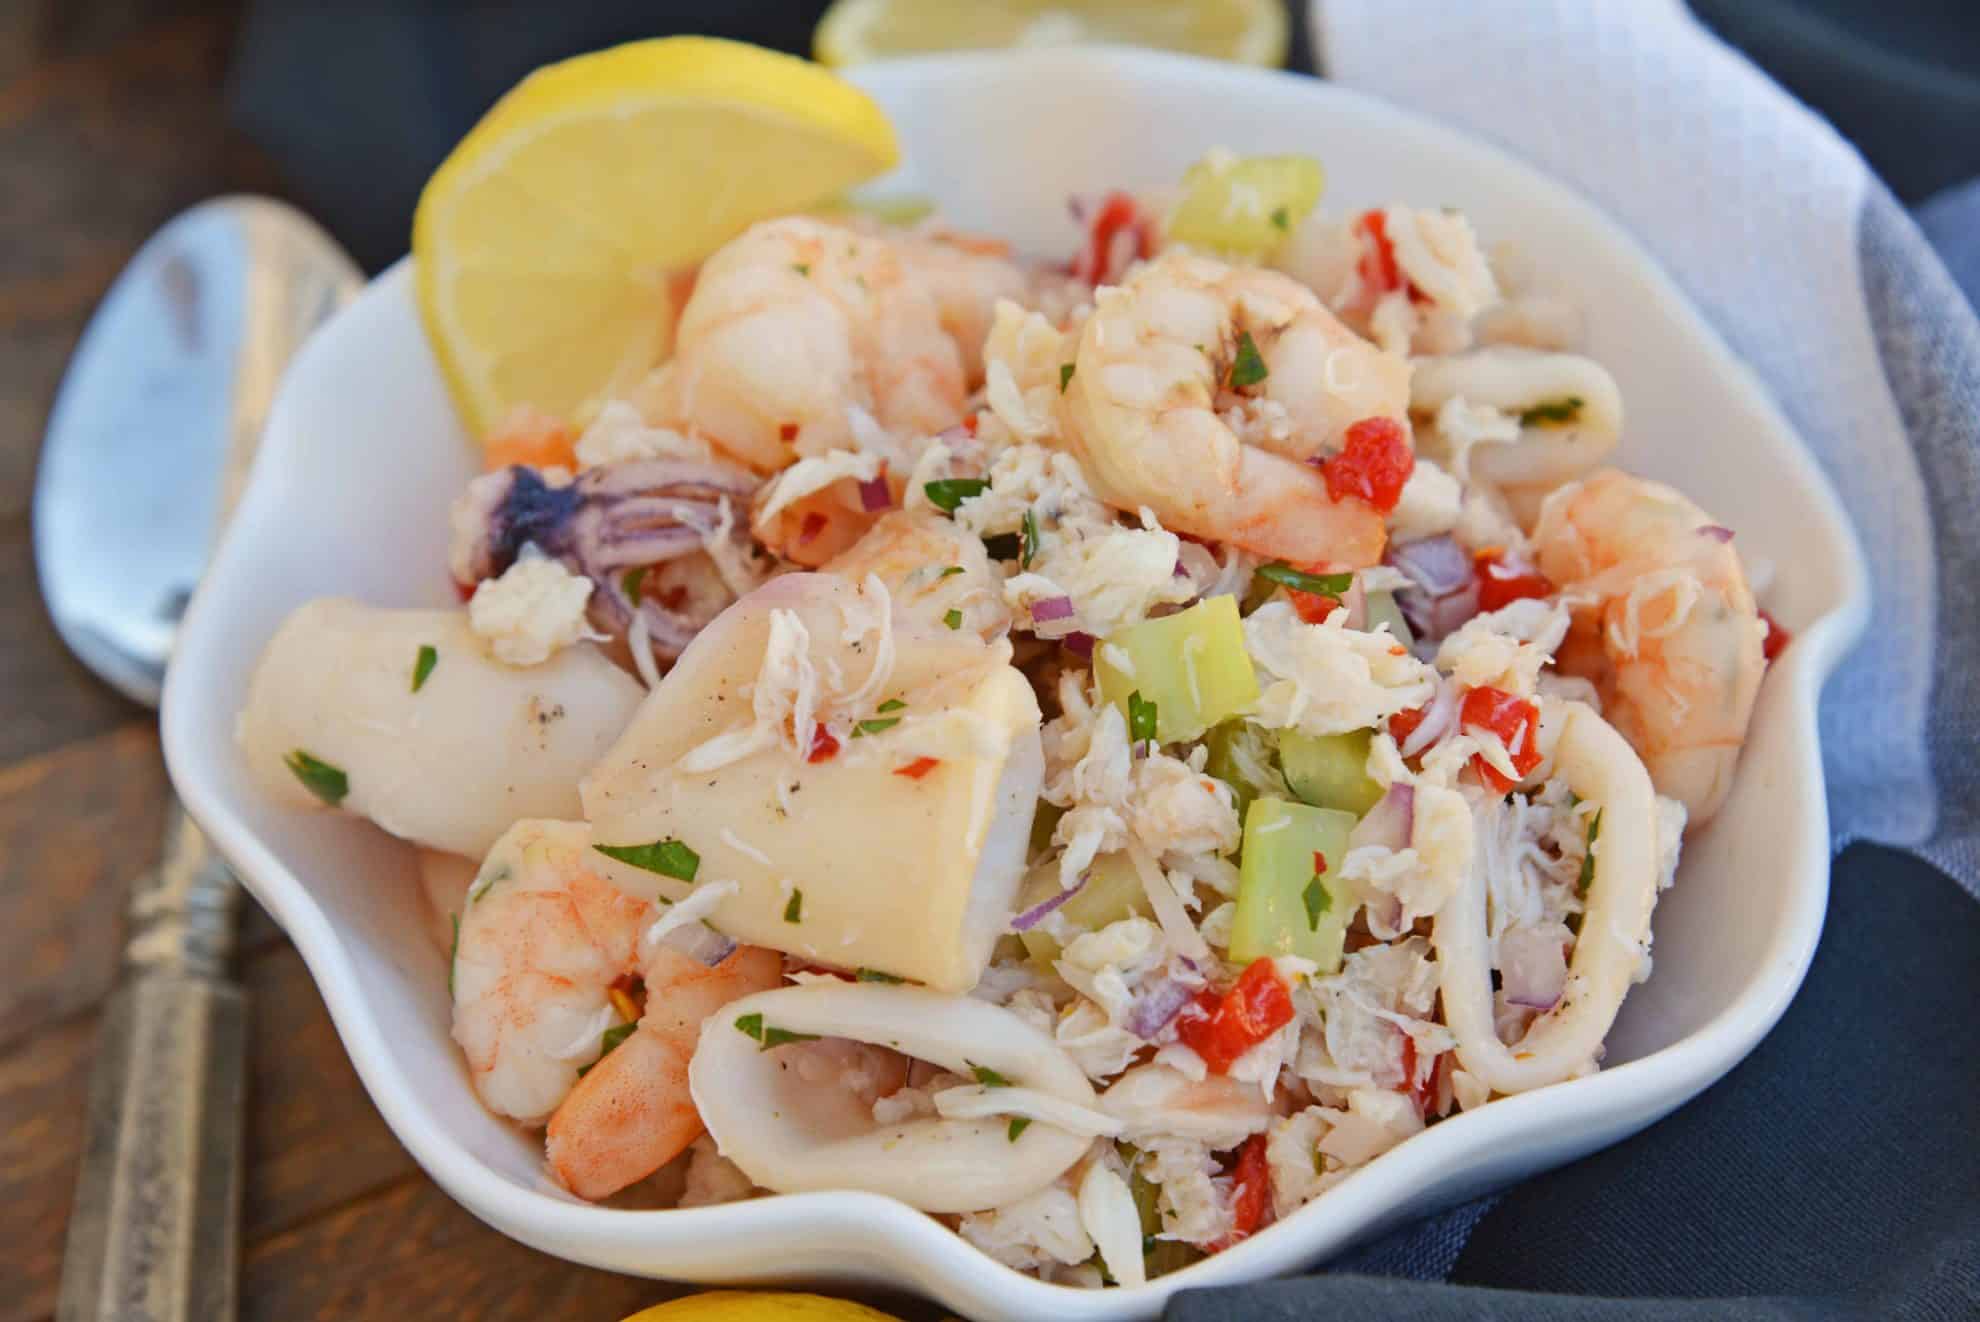 This Italian Seafood Salad, made with shrimp, calamari and lump crab meat, is one of the best and easiest seafood salad recipes you'll ever try.  #seafoodsalad #italianseafoodsalad www.savoryexperiments.com